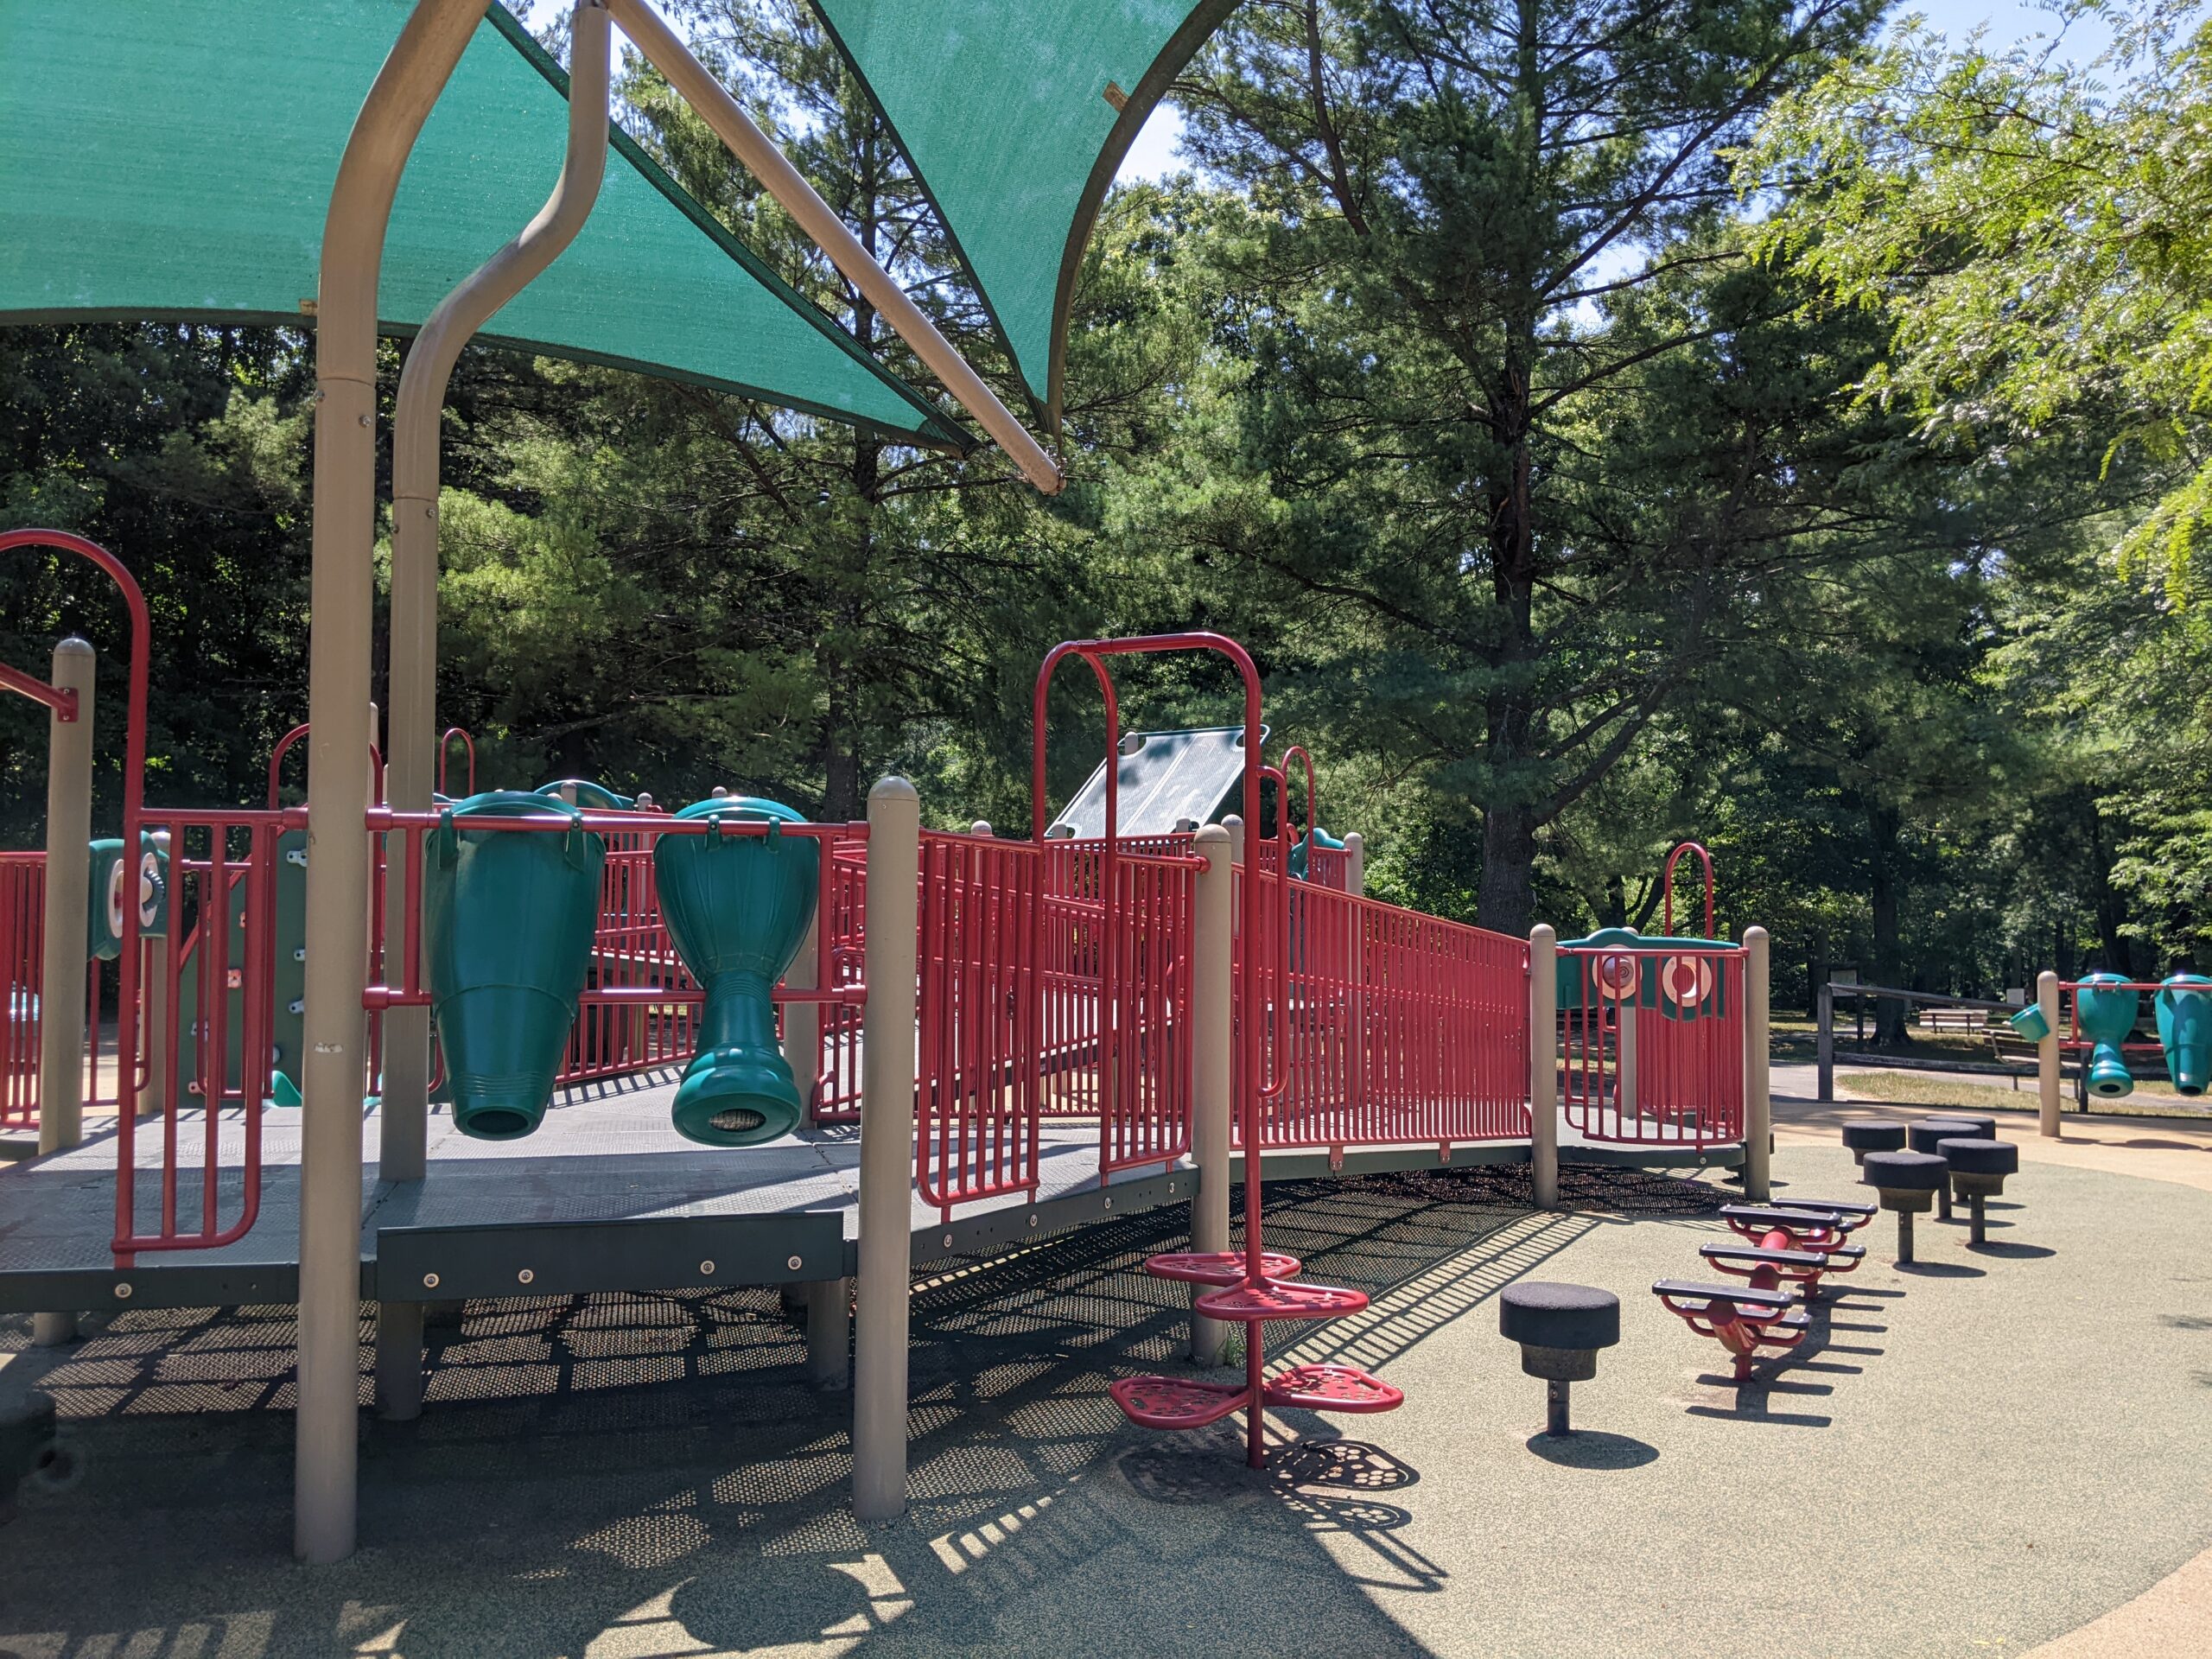 Children's Park Playground at Veteran's Park in Hamilton Township NJ - Special Features - Drums, stepping pods, and other features